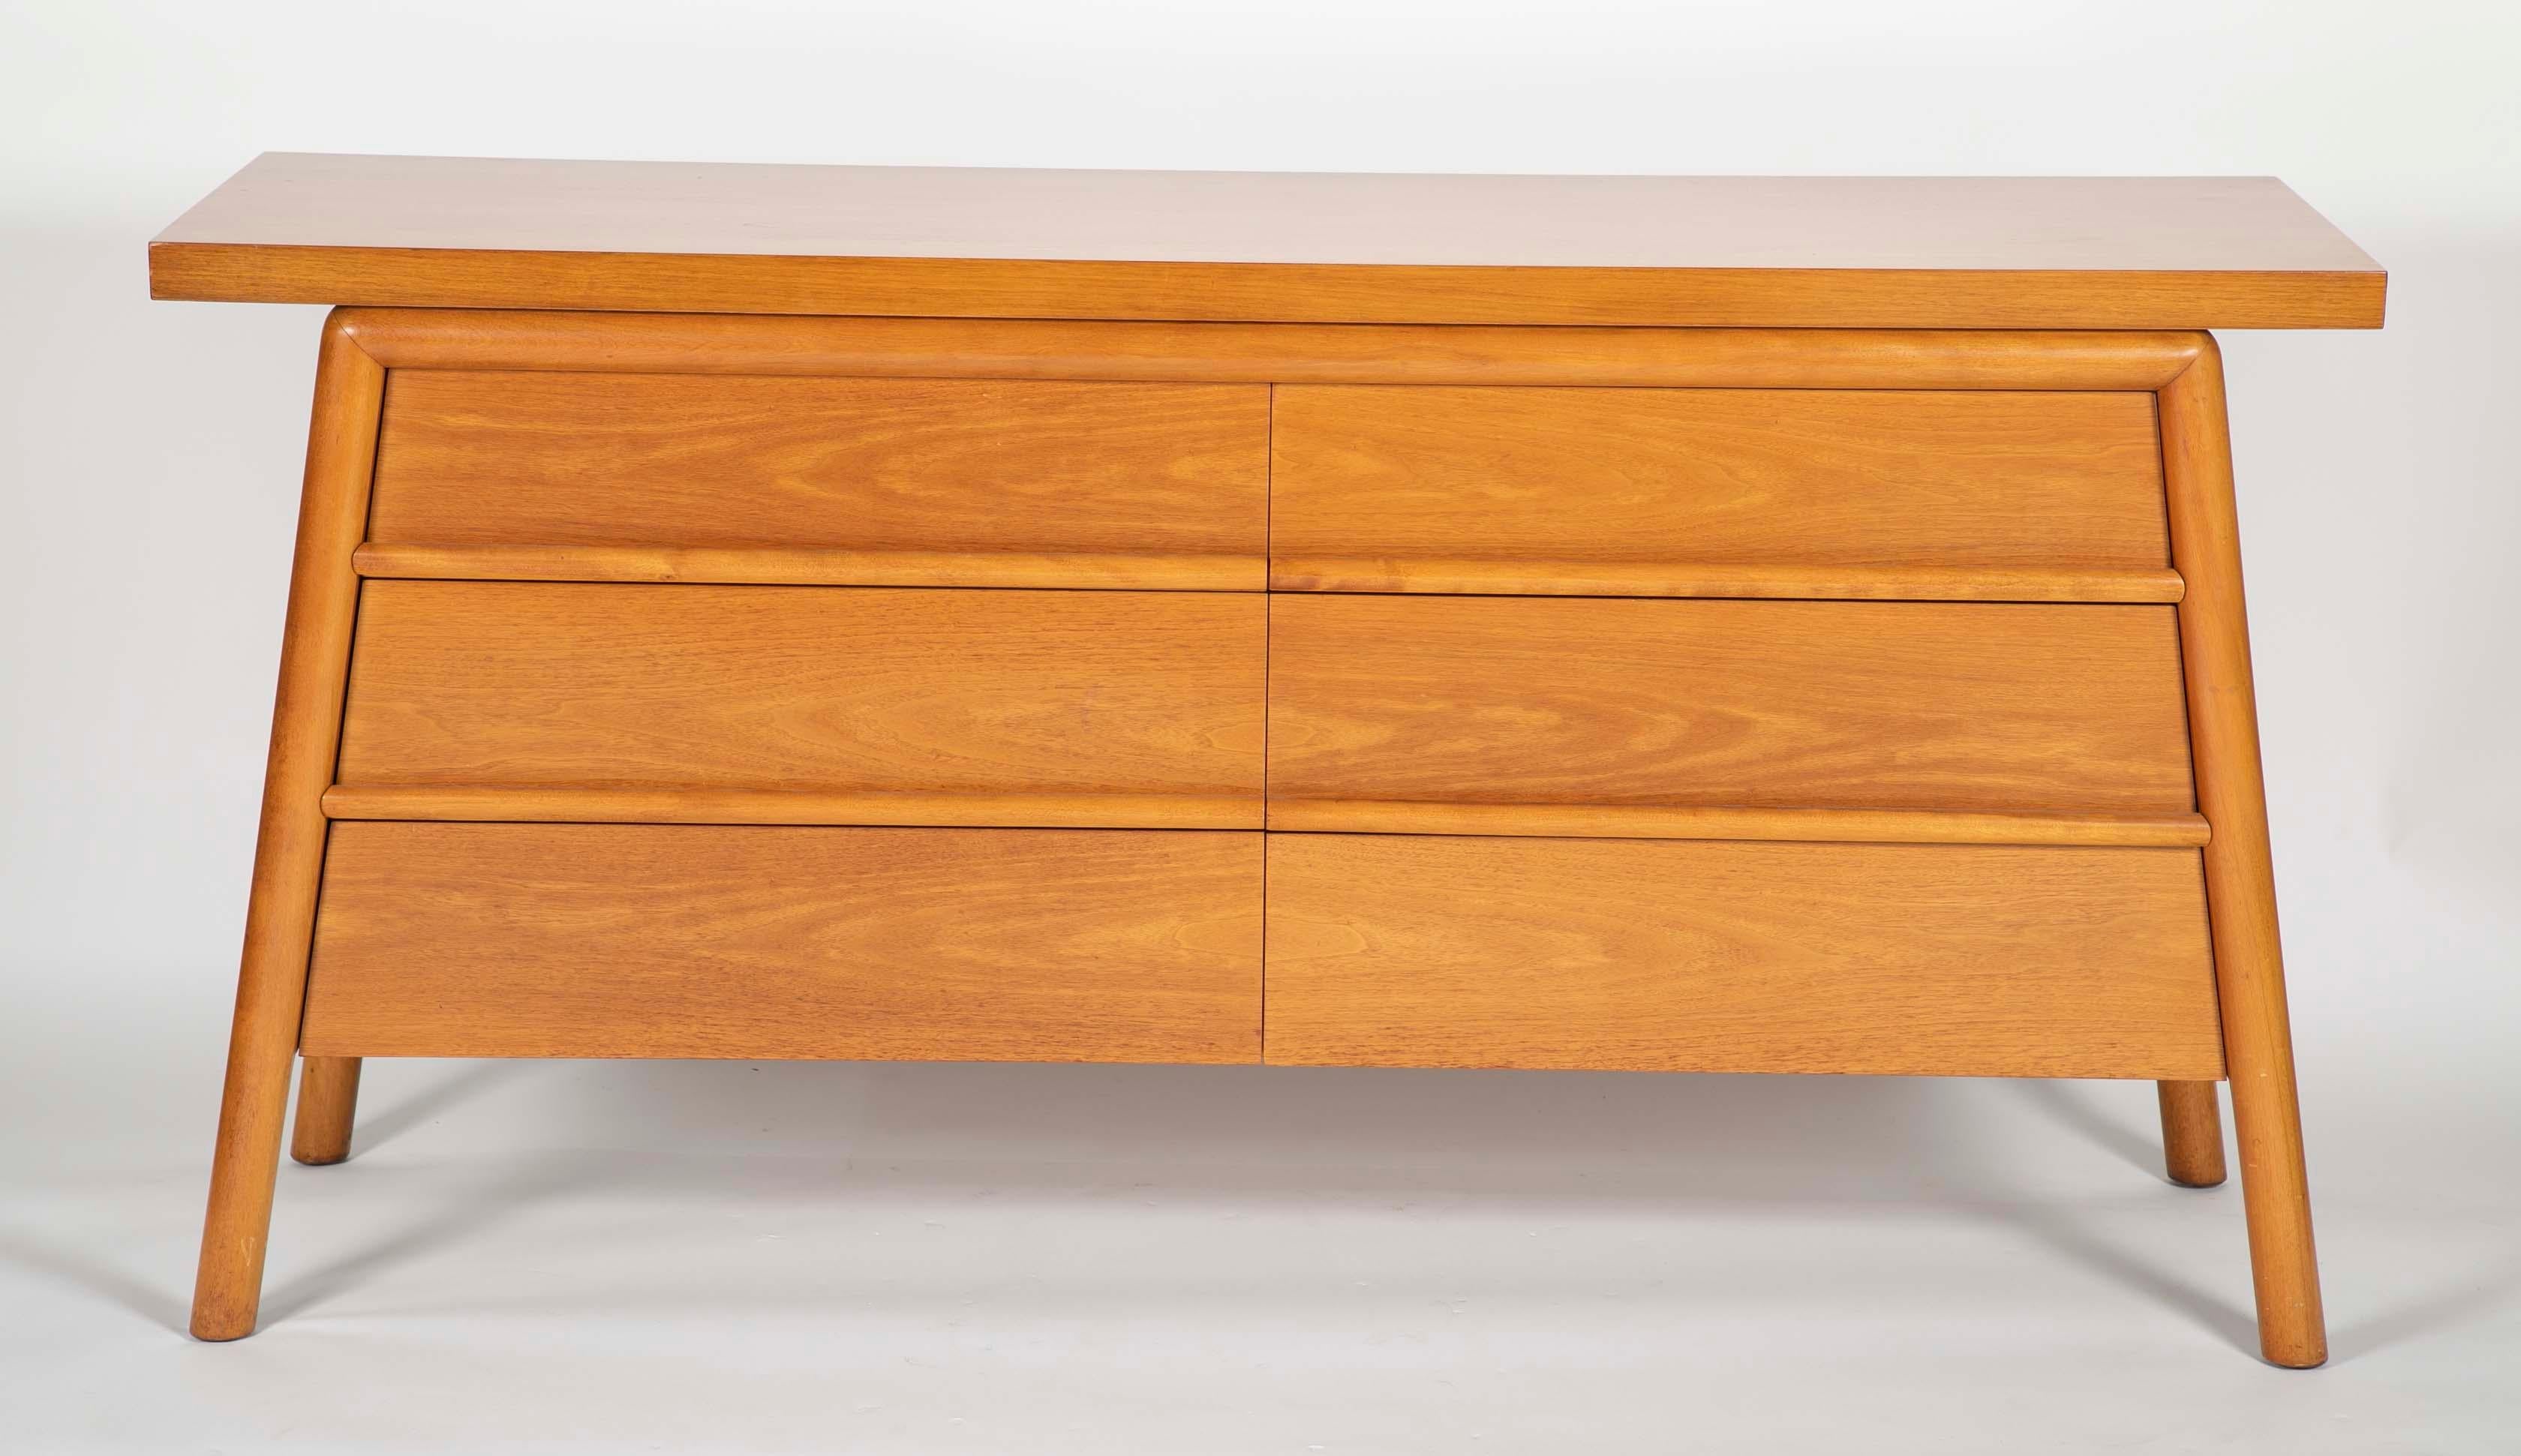 T.H. Robsjohn-Gibbings credenza bleached Mahogany six-drawer credenza with slab top and canted legs.